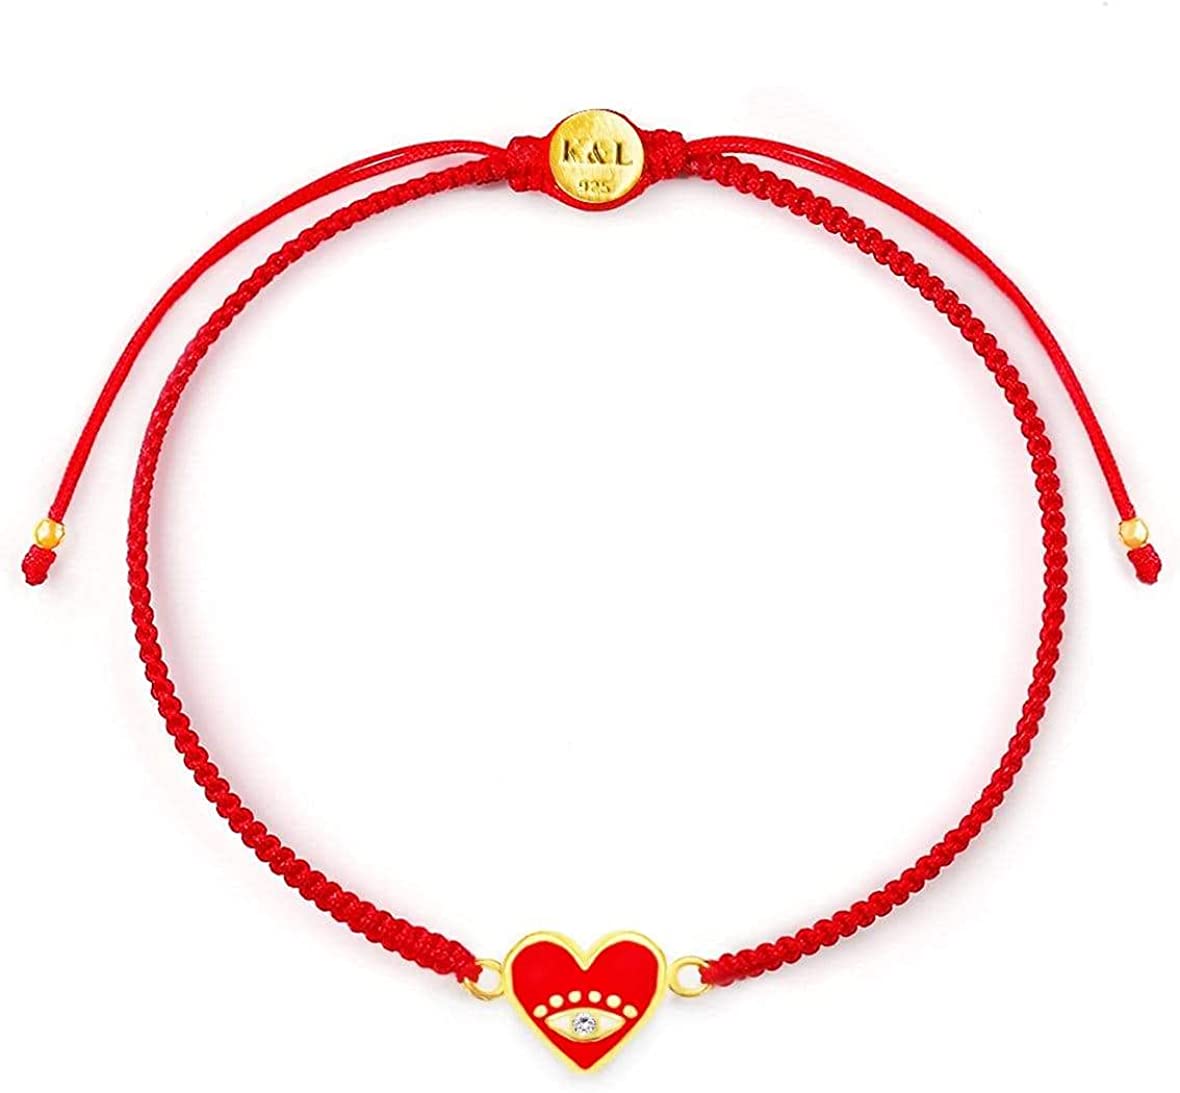 Karma and Luck - Devoted to Love - Women's 18K Gold Plated Brass Heart Embedded Diamond Chip Charm Red String Adjustable Bracelet Handmade with Love in Bali